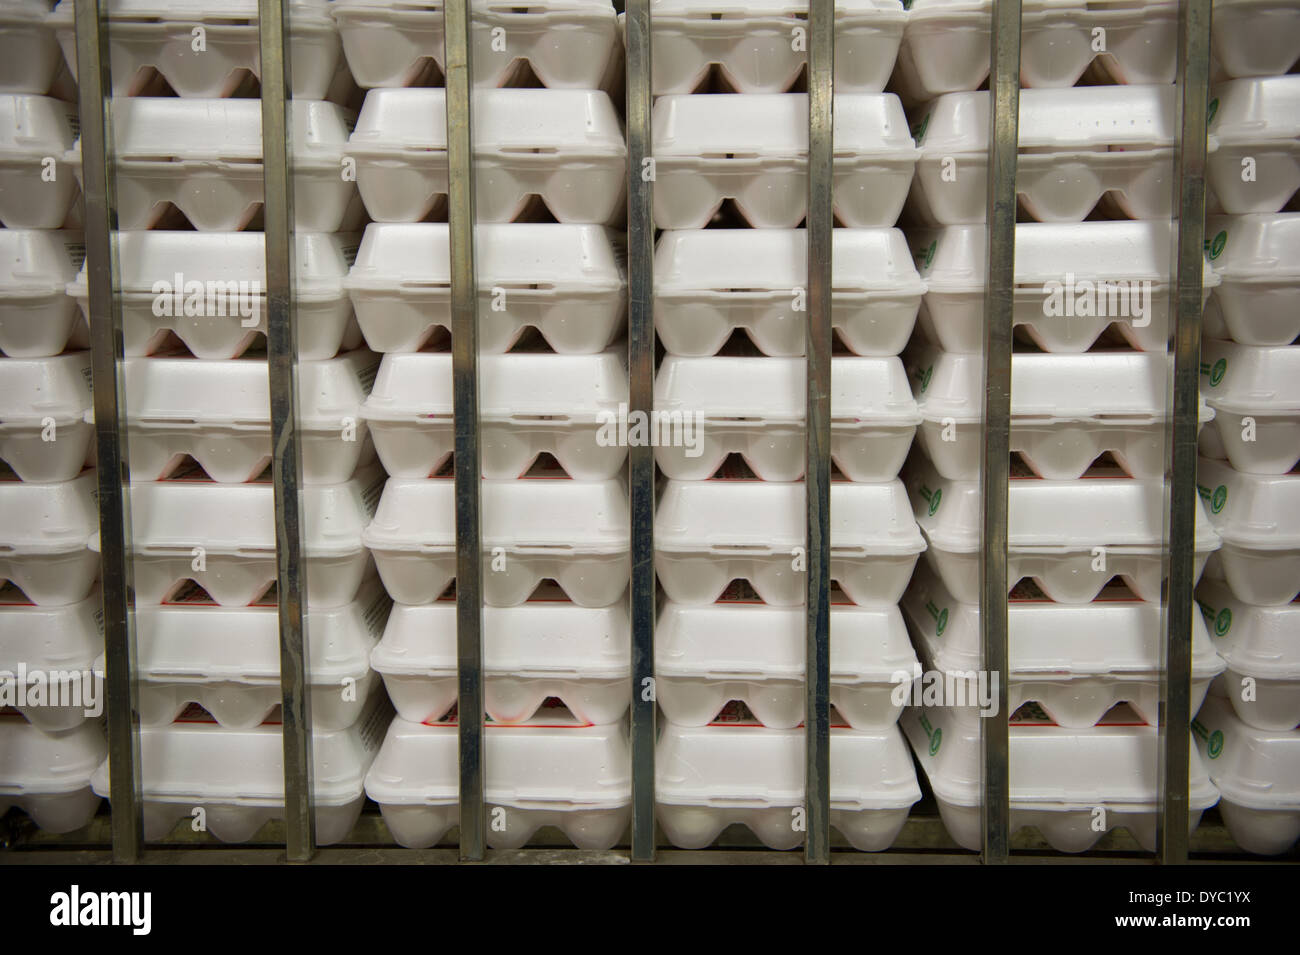 Eggs sorted in cartons on a conventional production commercial egg farm Stock Photo